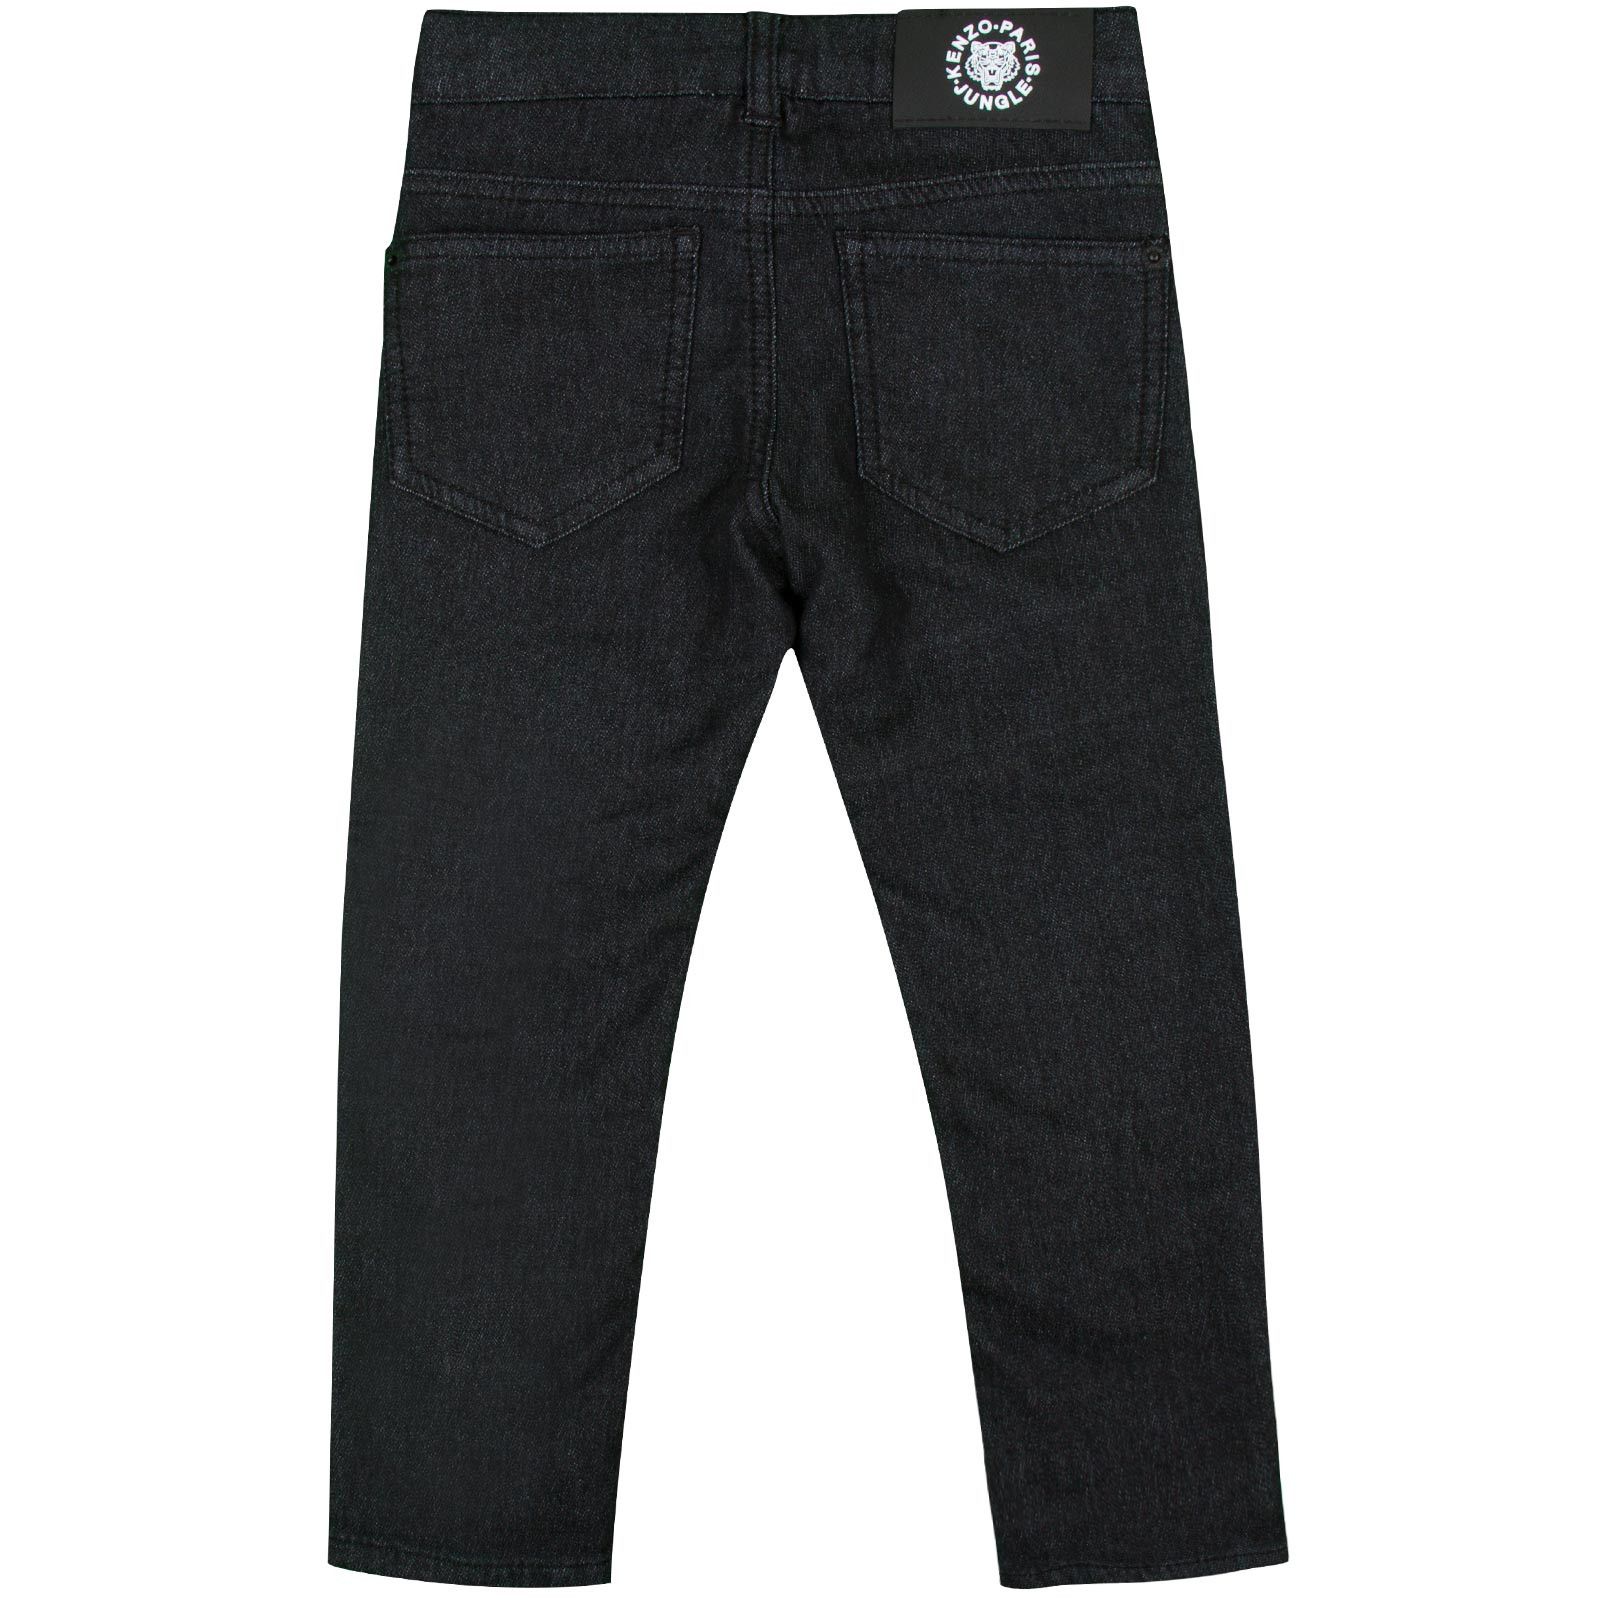 Boys Black Monster Embroidered Jeans With Metal Logo - CÉMAROSE | Children's Fashion Store - 2